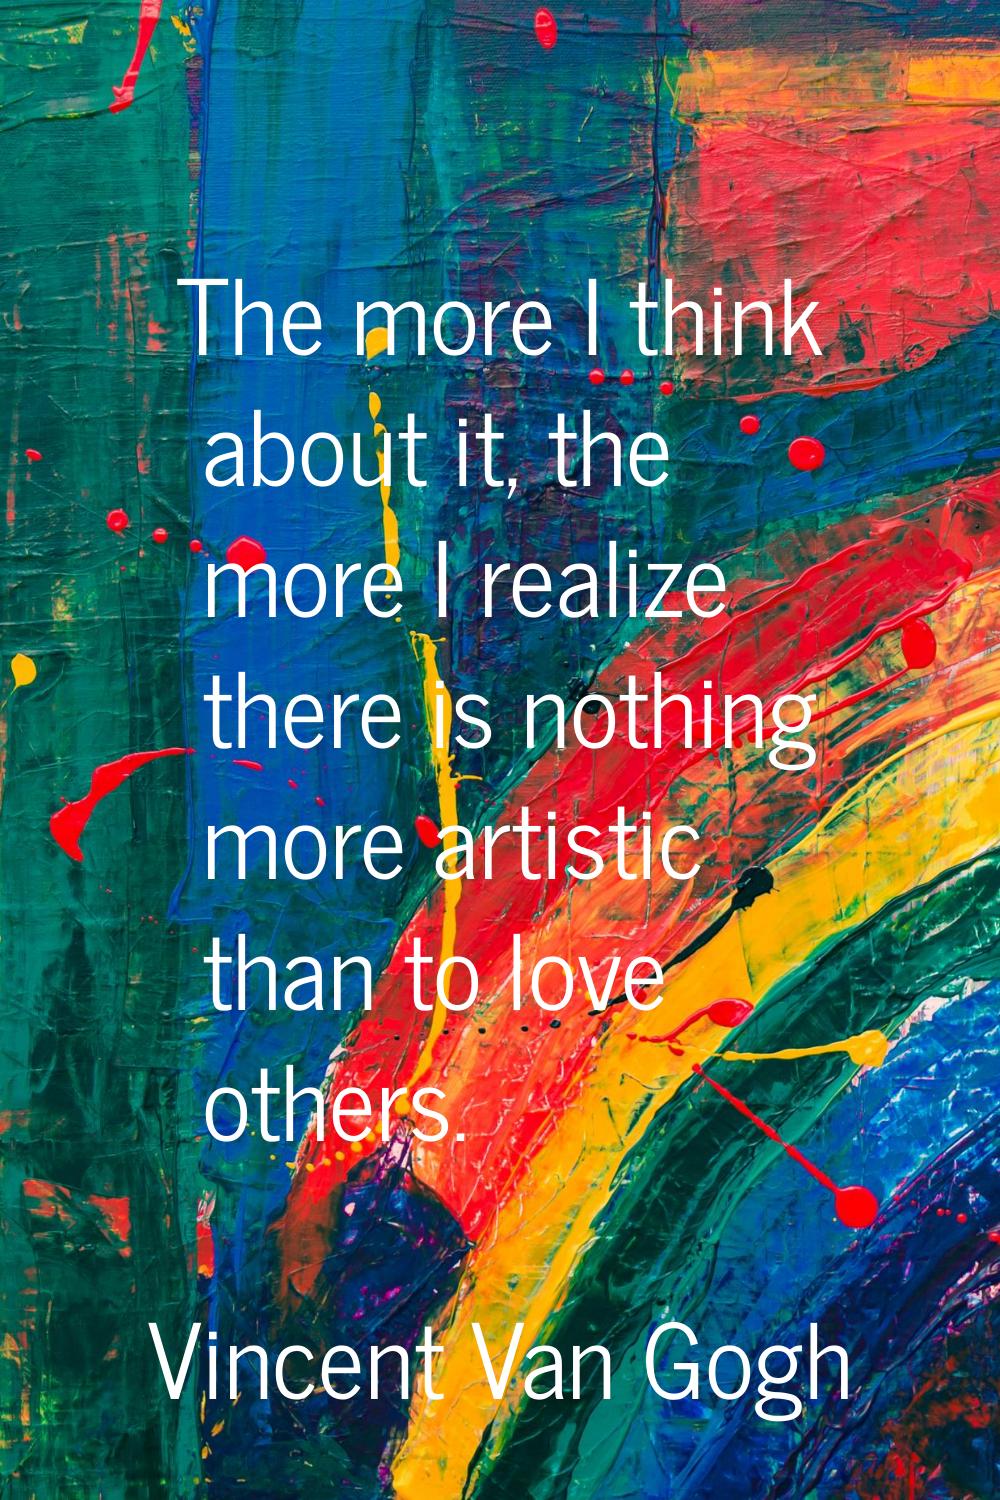 The more I think about it, the more I realize there is nothing more artistic than to love others.